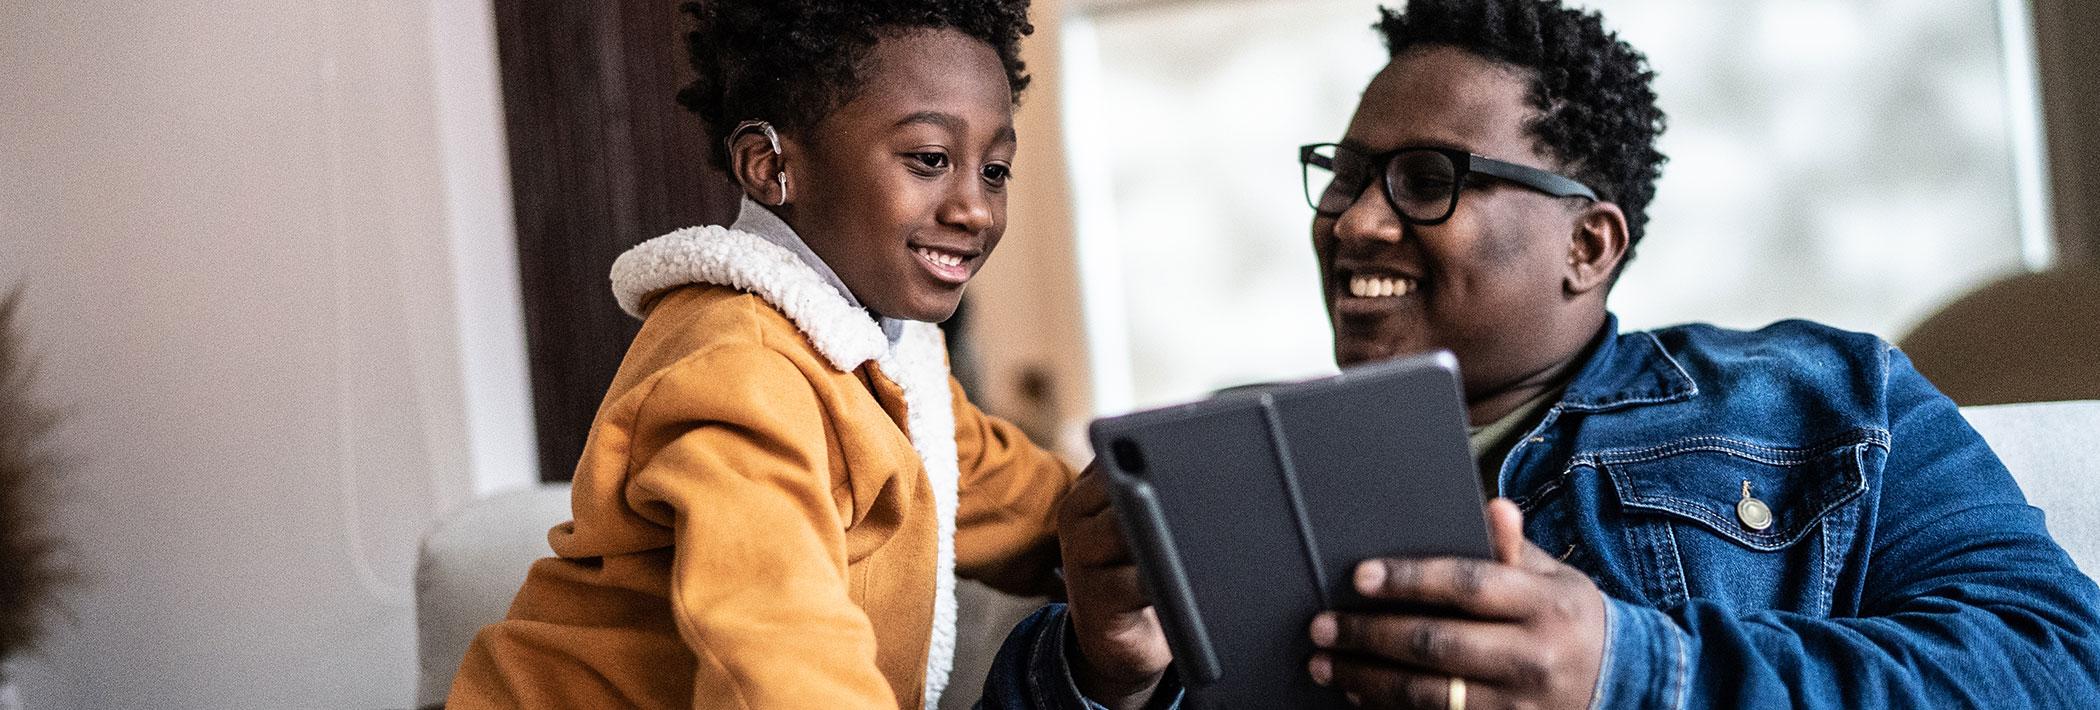 A father and son bond with each other over a tablet.